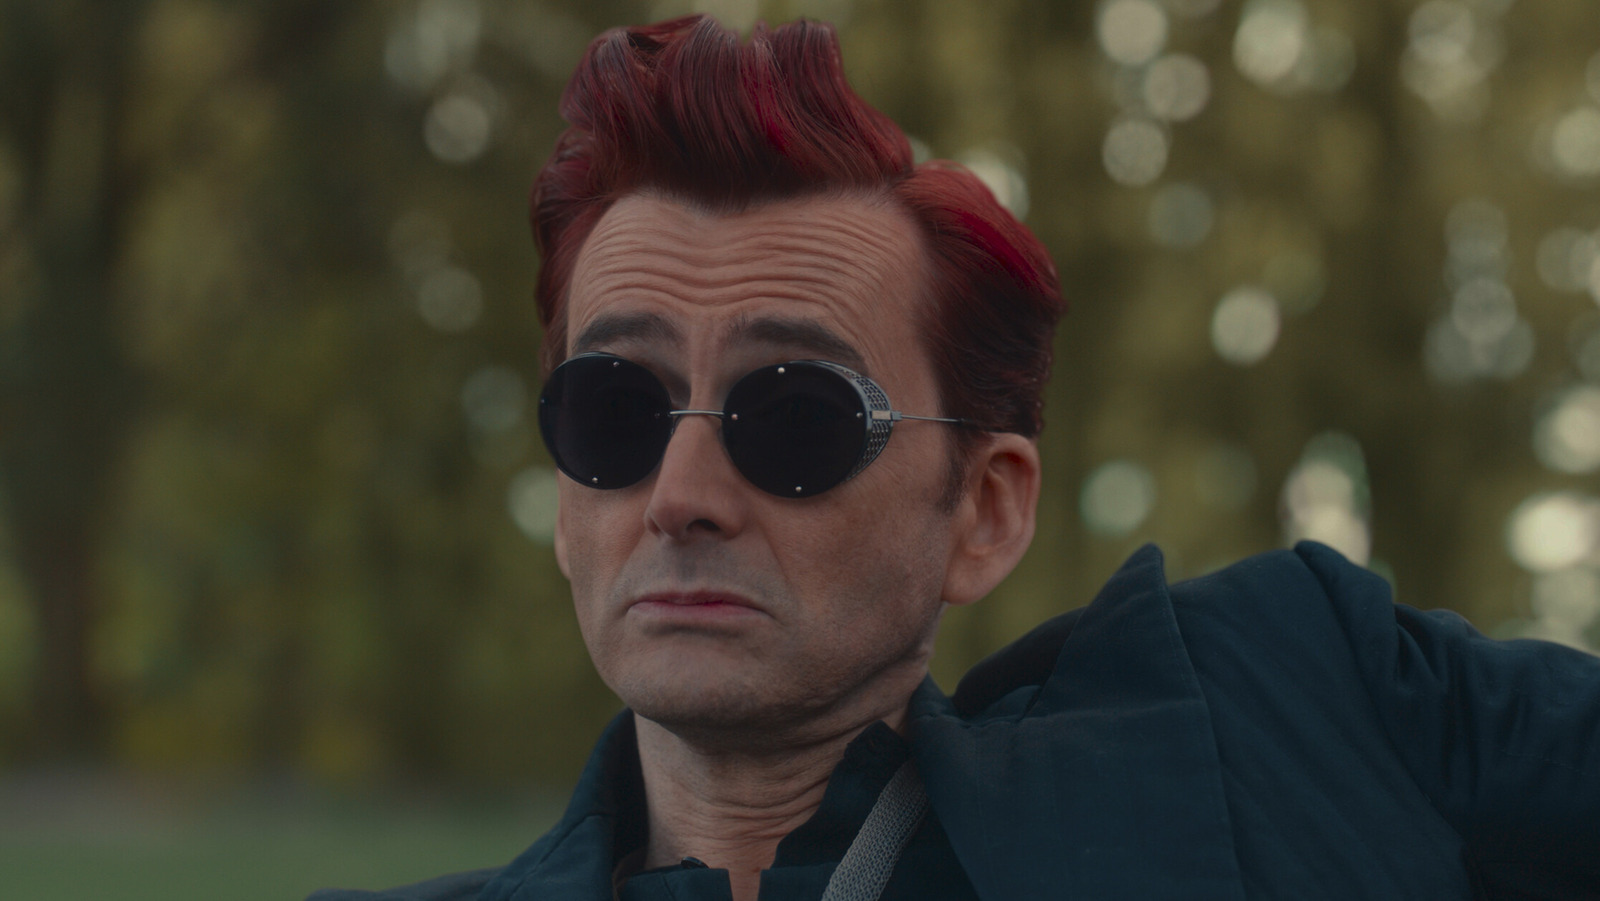 https://www.slashfilm.com/img/gallery/good-omens-2-david-tennant-on-donning-crowleys-slightly-too-tight-trousers-once-more-exclusive-interview/l-intro-1689292186.jpg